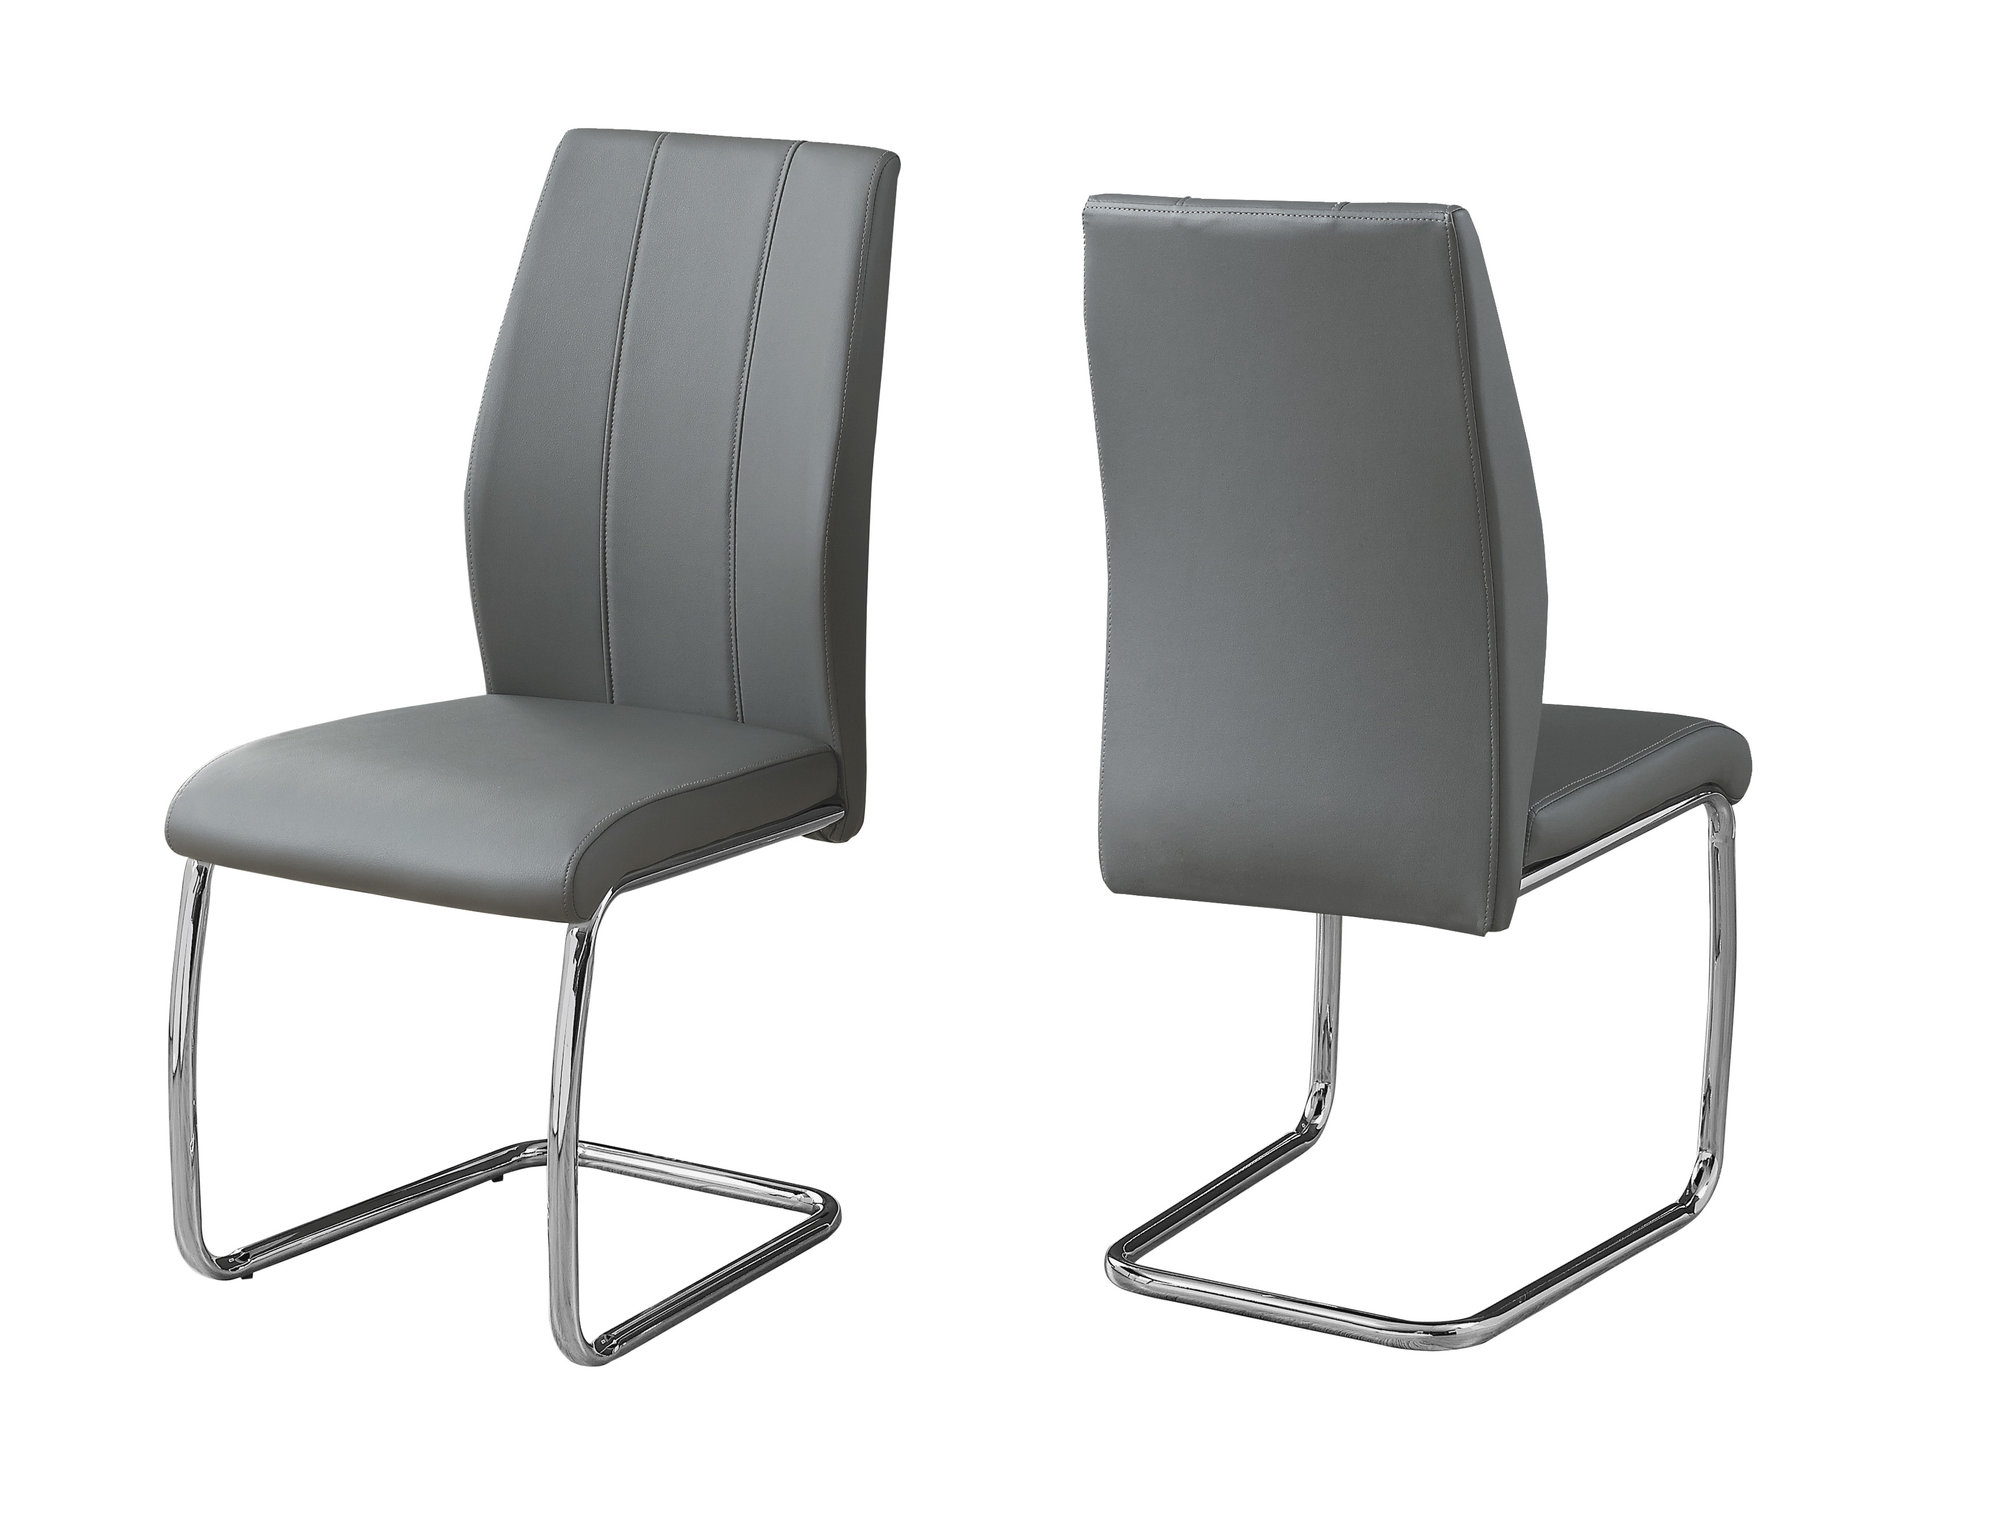 DINING CHAIR - 2PCS / 39"H / GREY LEATHER-LOOK / CHROME